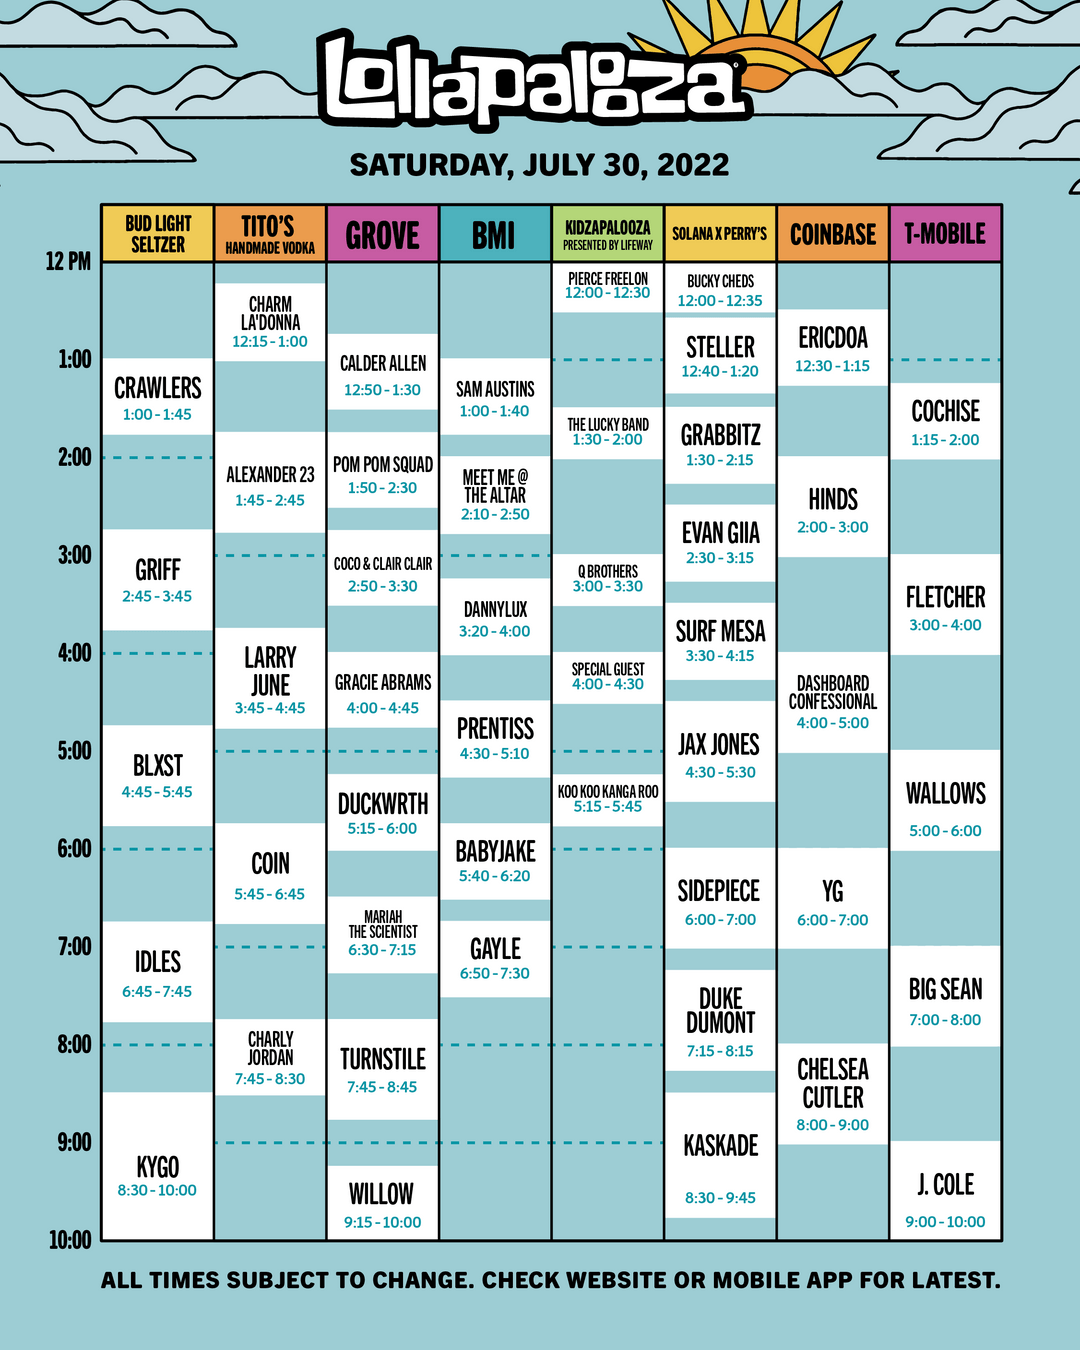 2022 Lollapalooza Schedule Announced 4